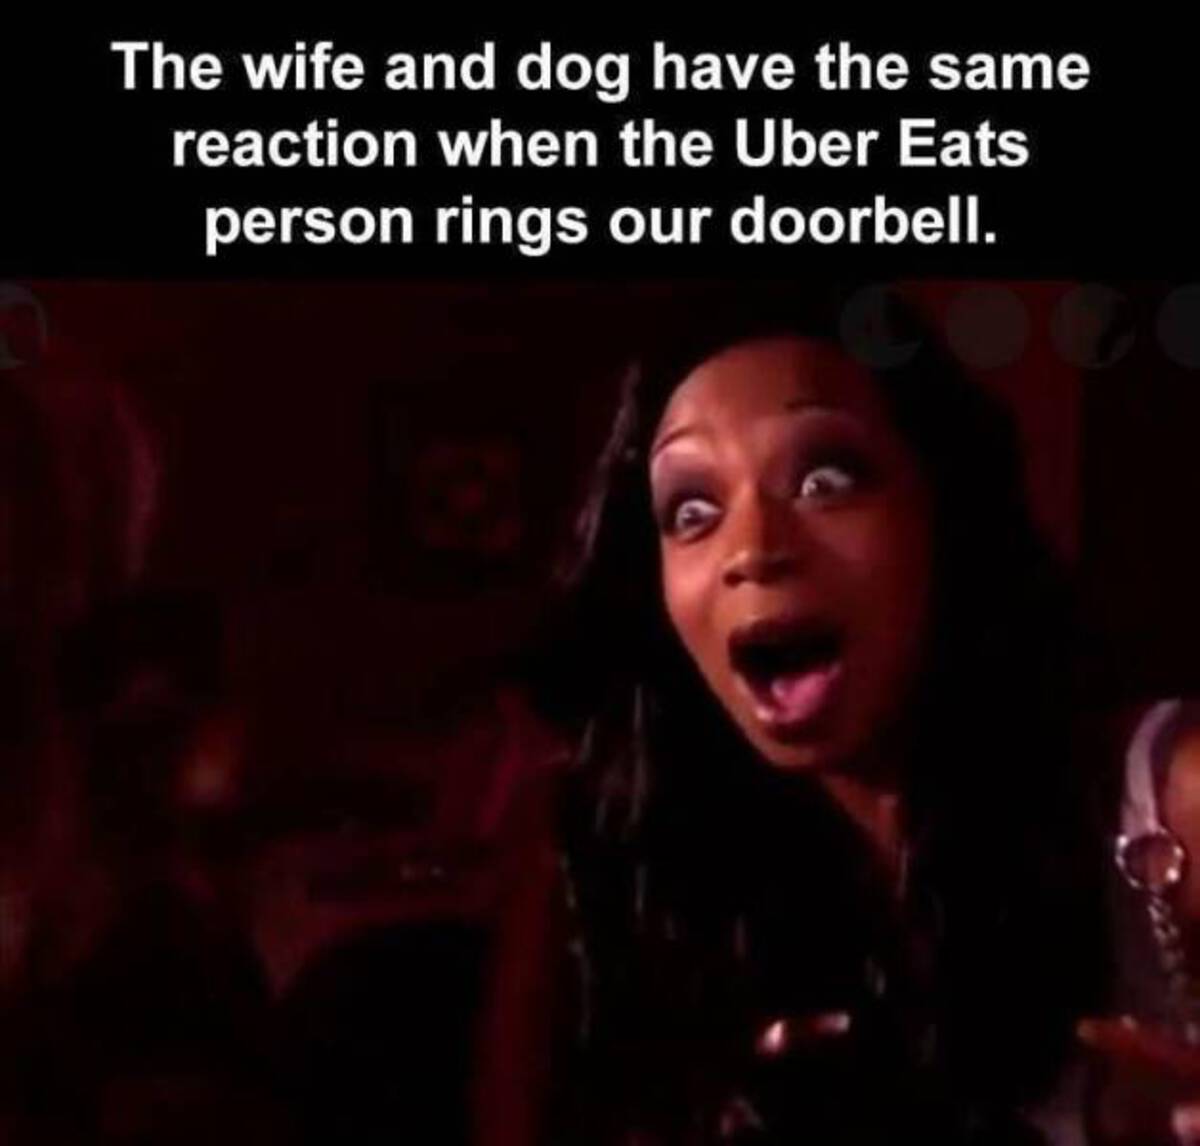 The wife and dog have the same reaction when the Uber Eats person rings our doorbell.